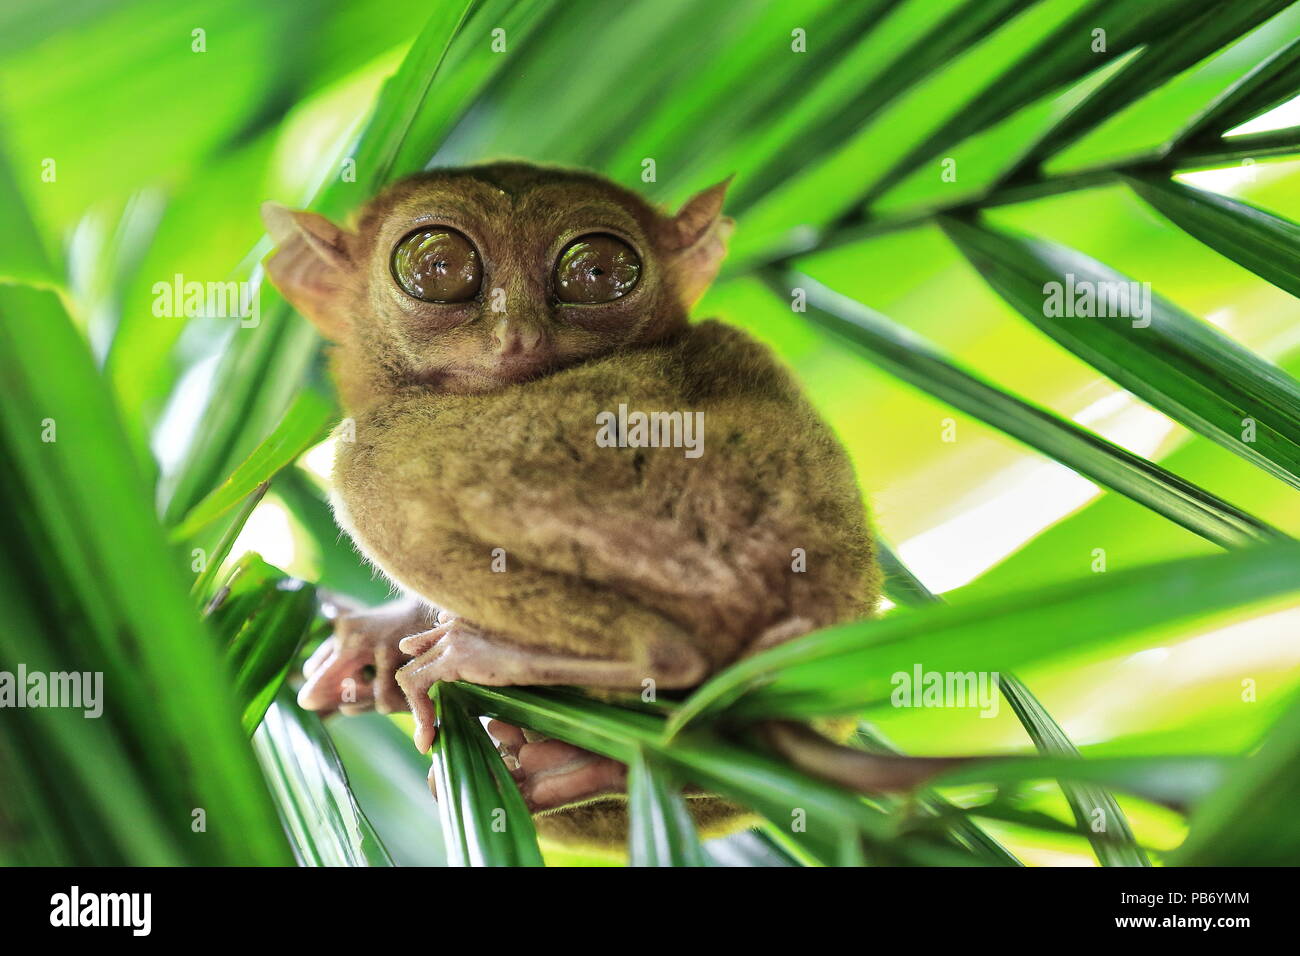 Philippine tarsier -Carlito syrichta- one of the smallest primates in the world perching on a bamboo shot among bamboo leaves in a tropical rainforest Stock Photo